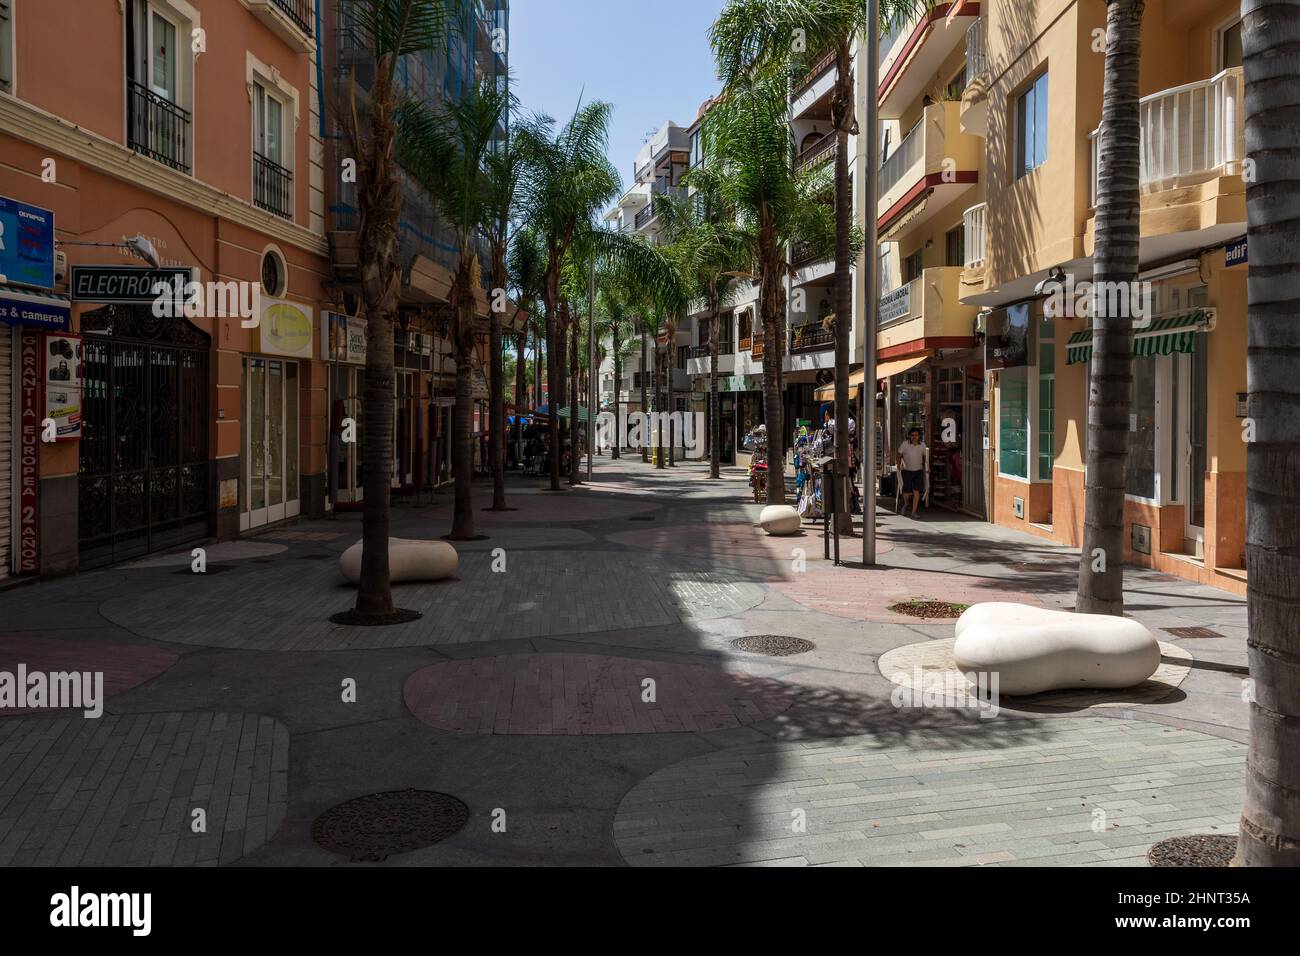 PUERTO DE LA CRUZ, TENERIFE, SPAIN - JULY 14, 2021: Uncrowded streets of a popular tourist town on the island following the COVID-19 pandemic. Tourism industry crisis. Stock Photo